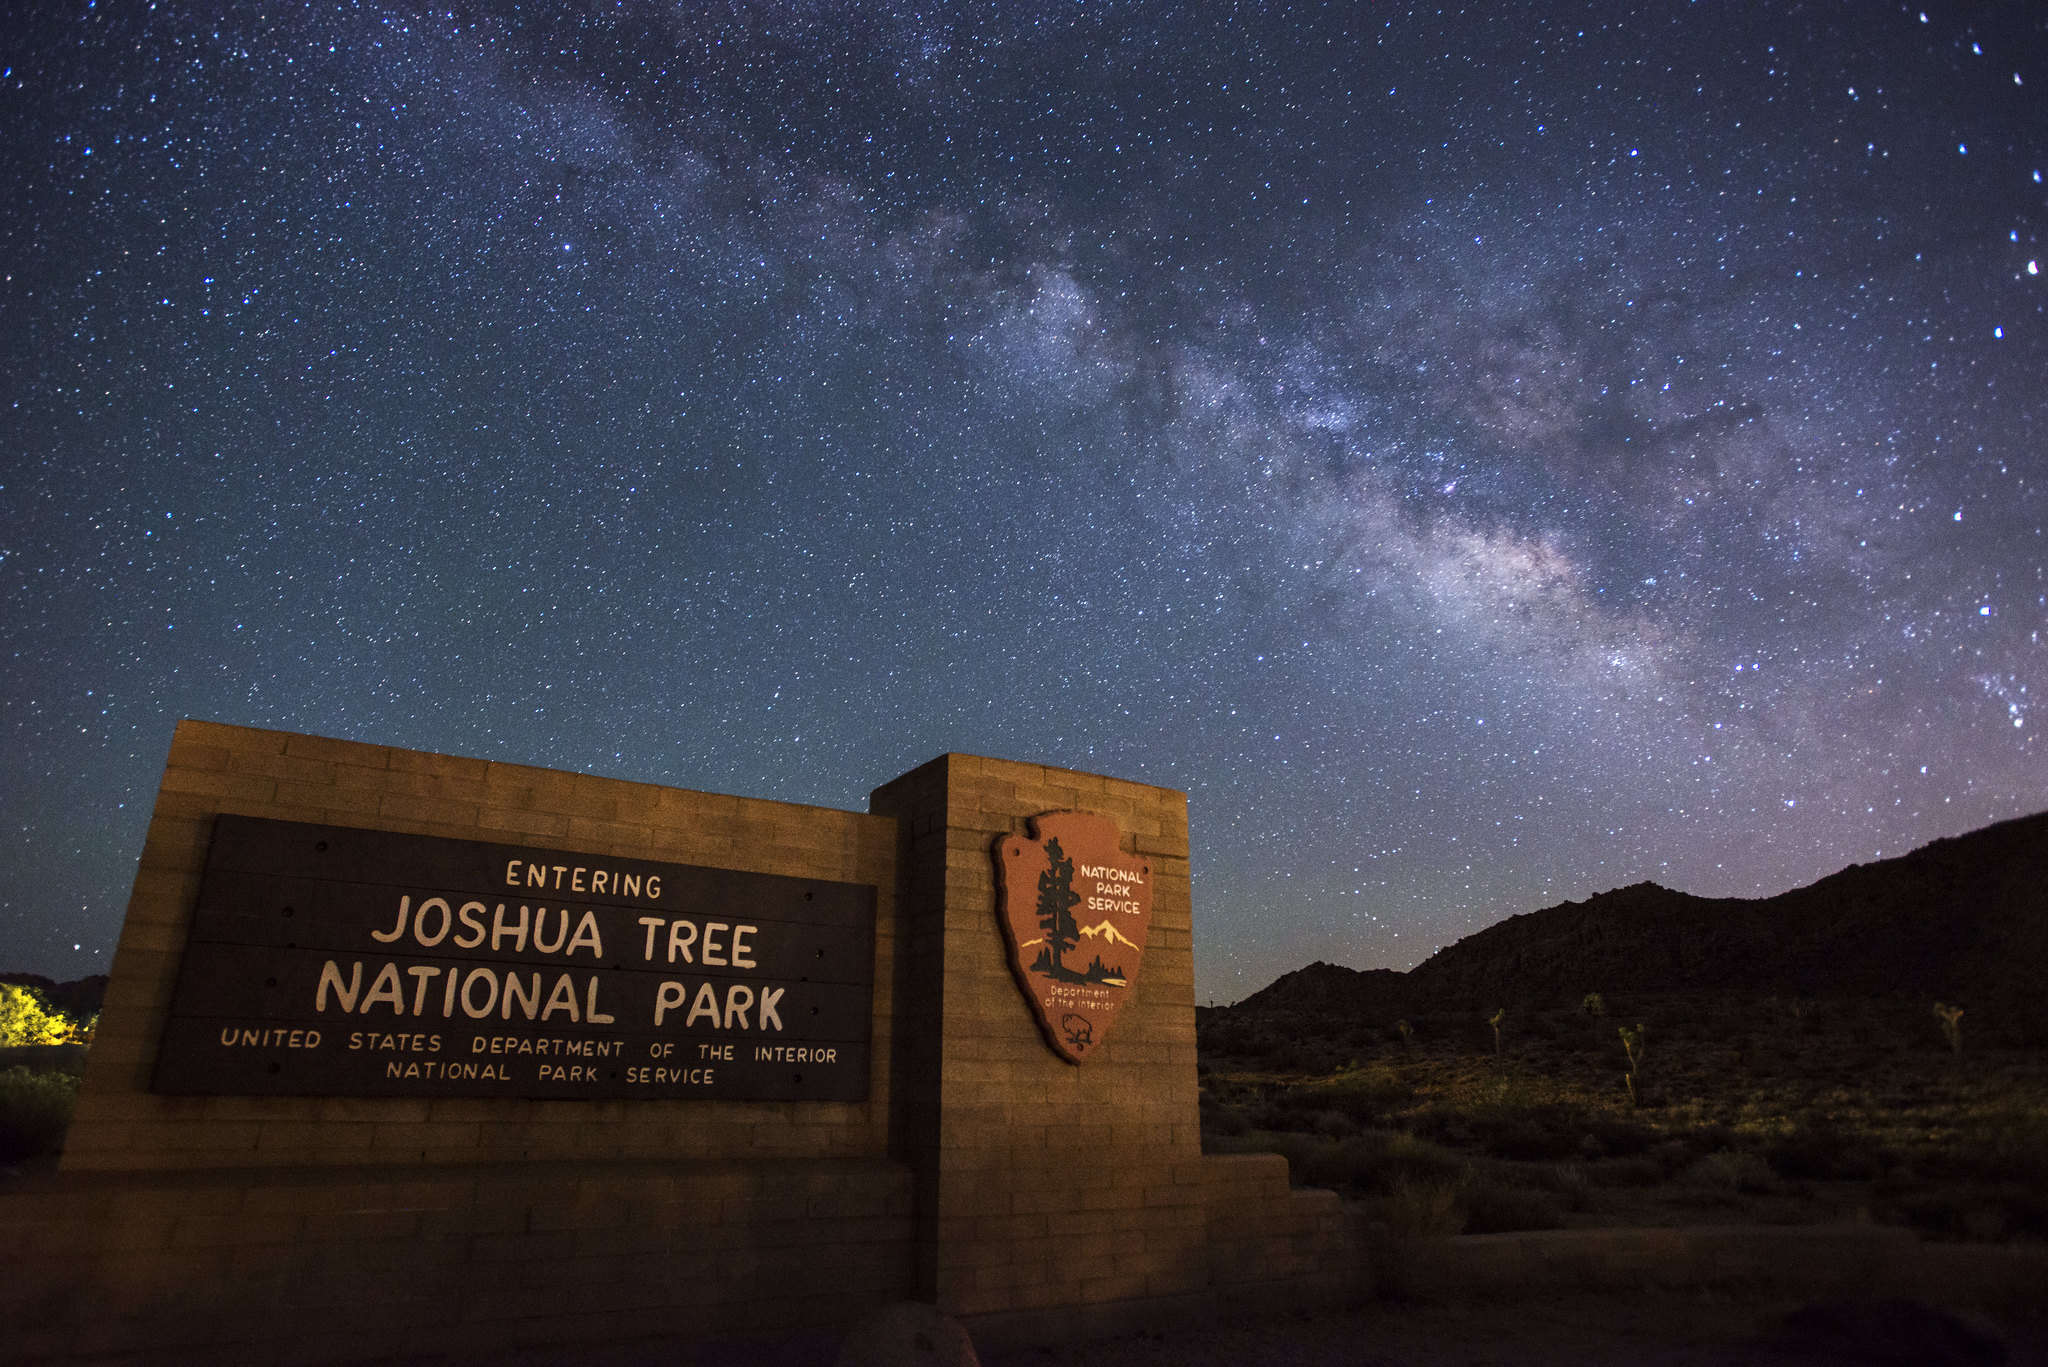 Park Entrance sign illuminated with many stars and the milky way in the backdrop